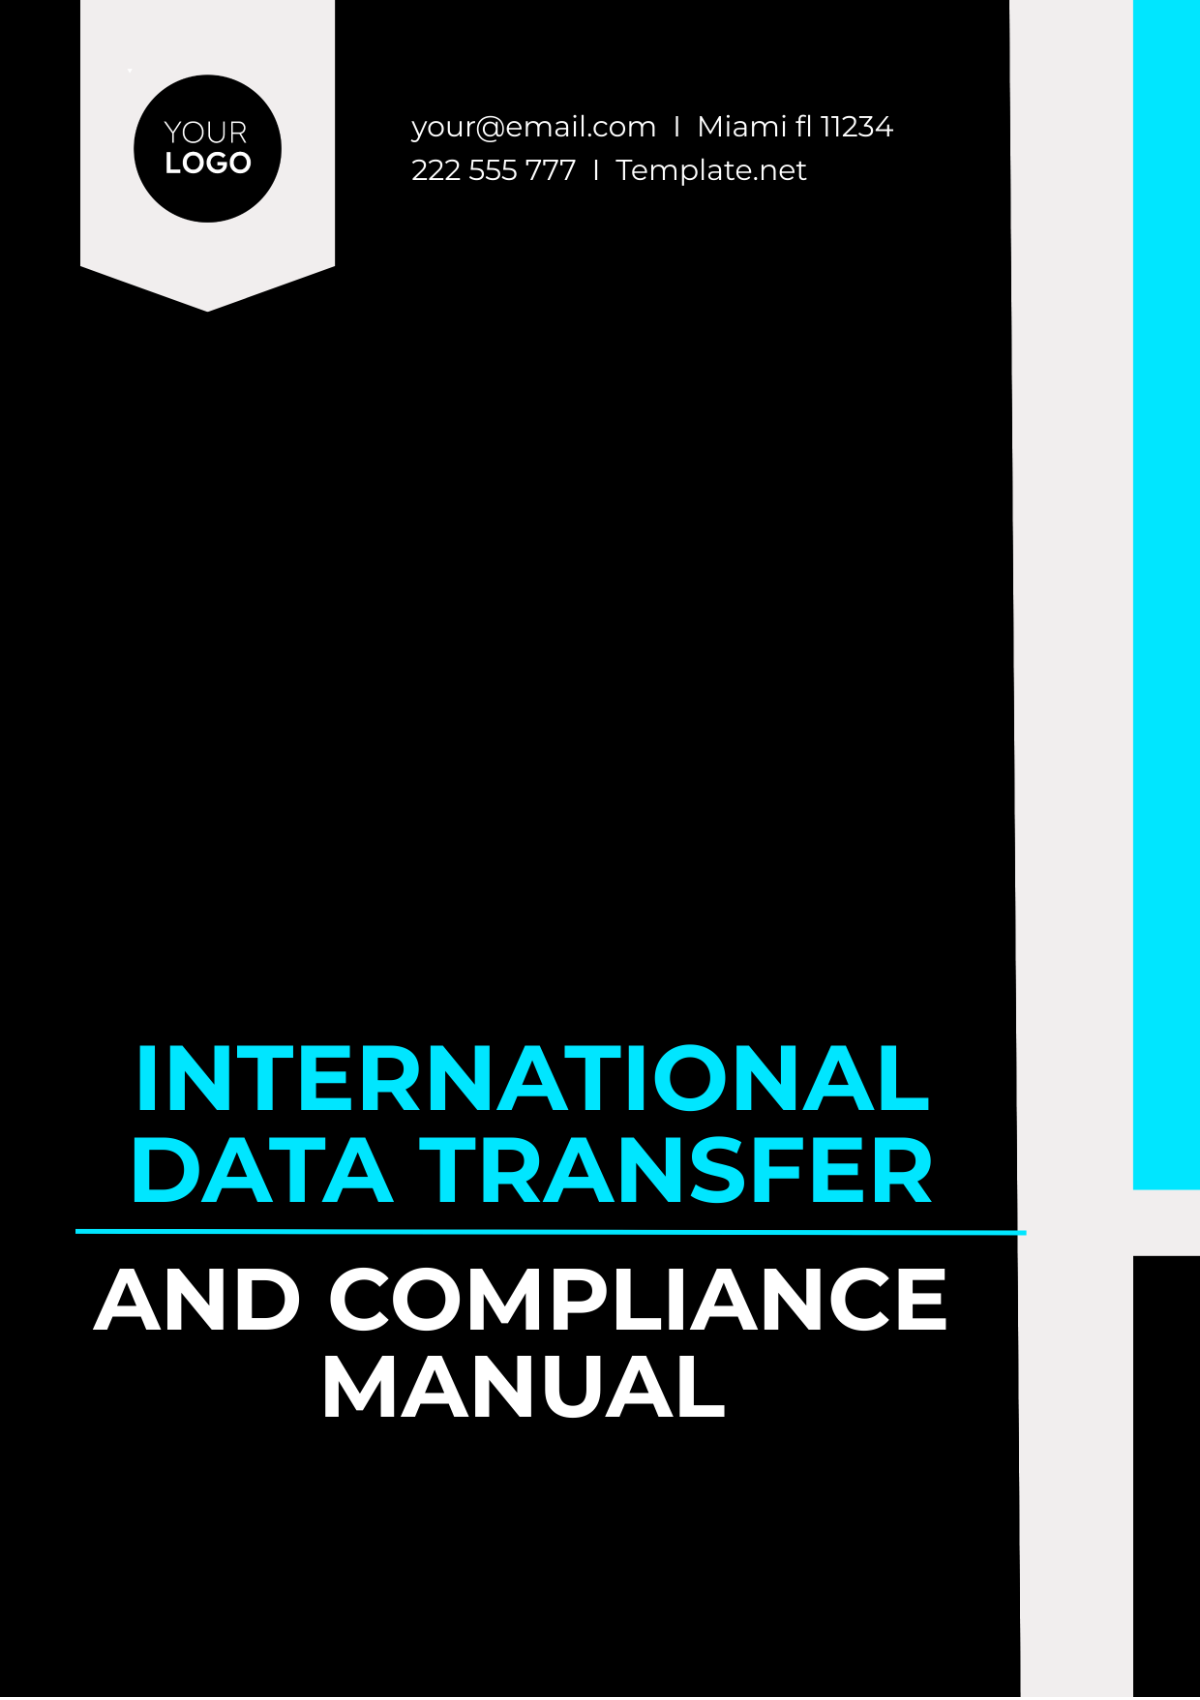 IT International Data Transfer And Compliance Manual Template